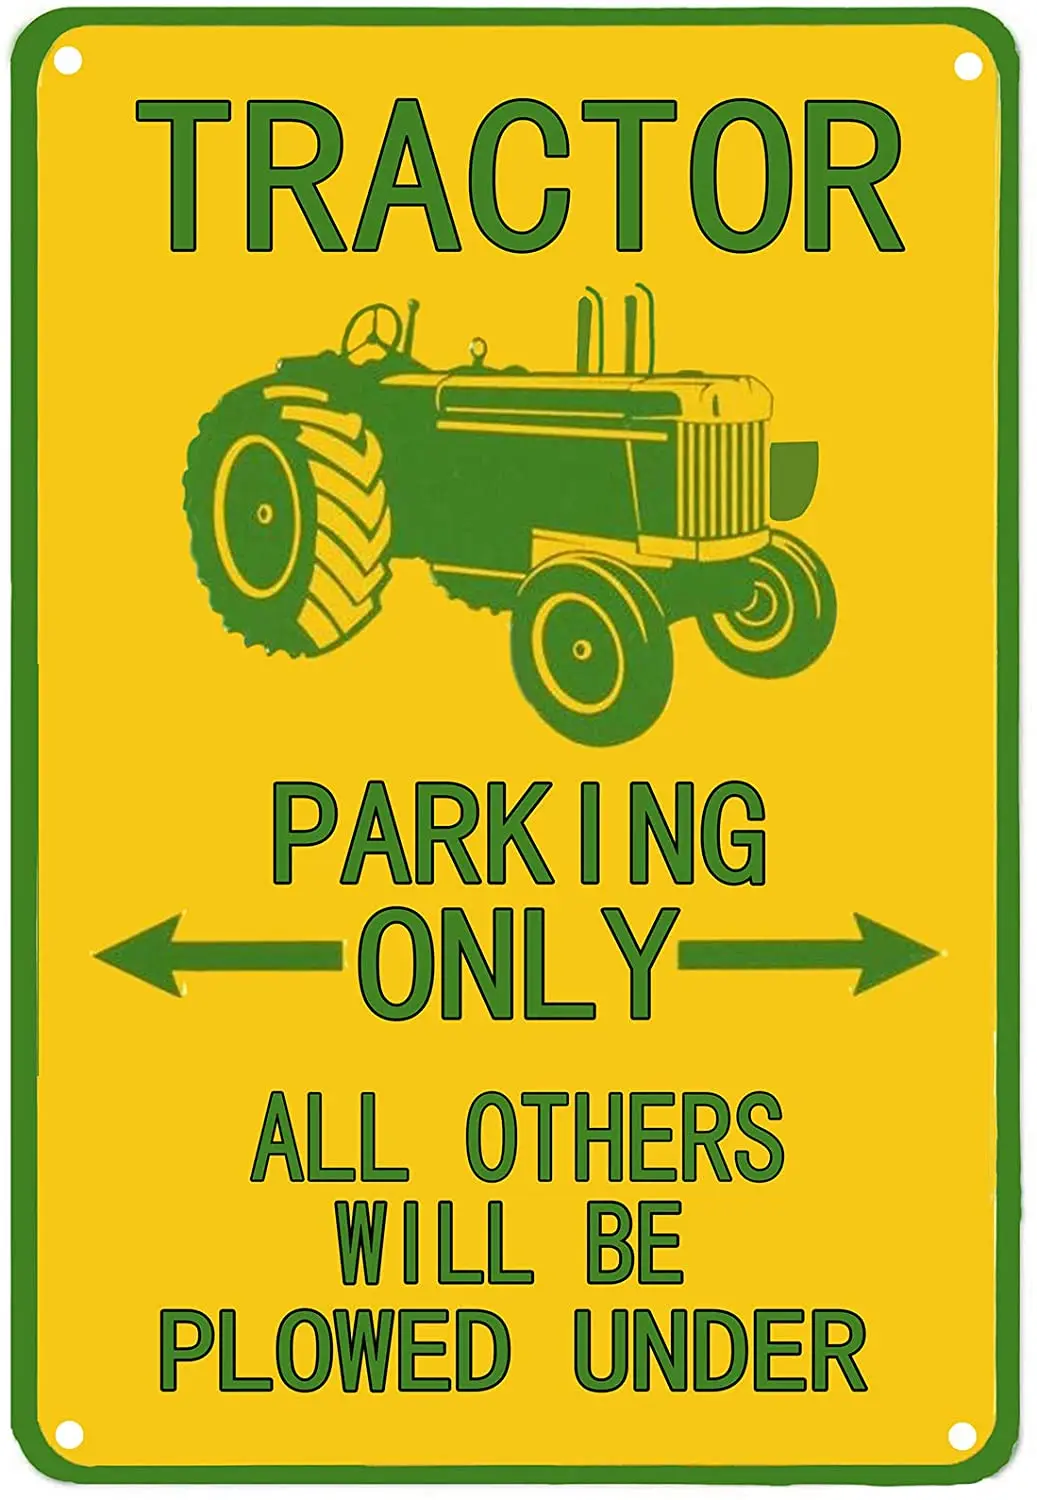 

Tractor Tin Sign Parking Only All Others Will Be Plowed Under Outdoor Garden Metal Vintage Garage Wall Signs Mancave Vintage